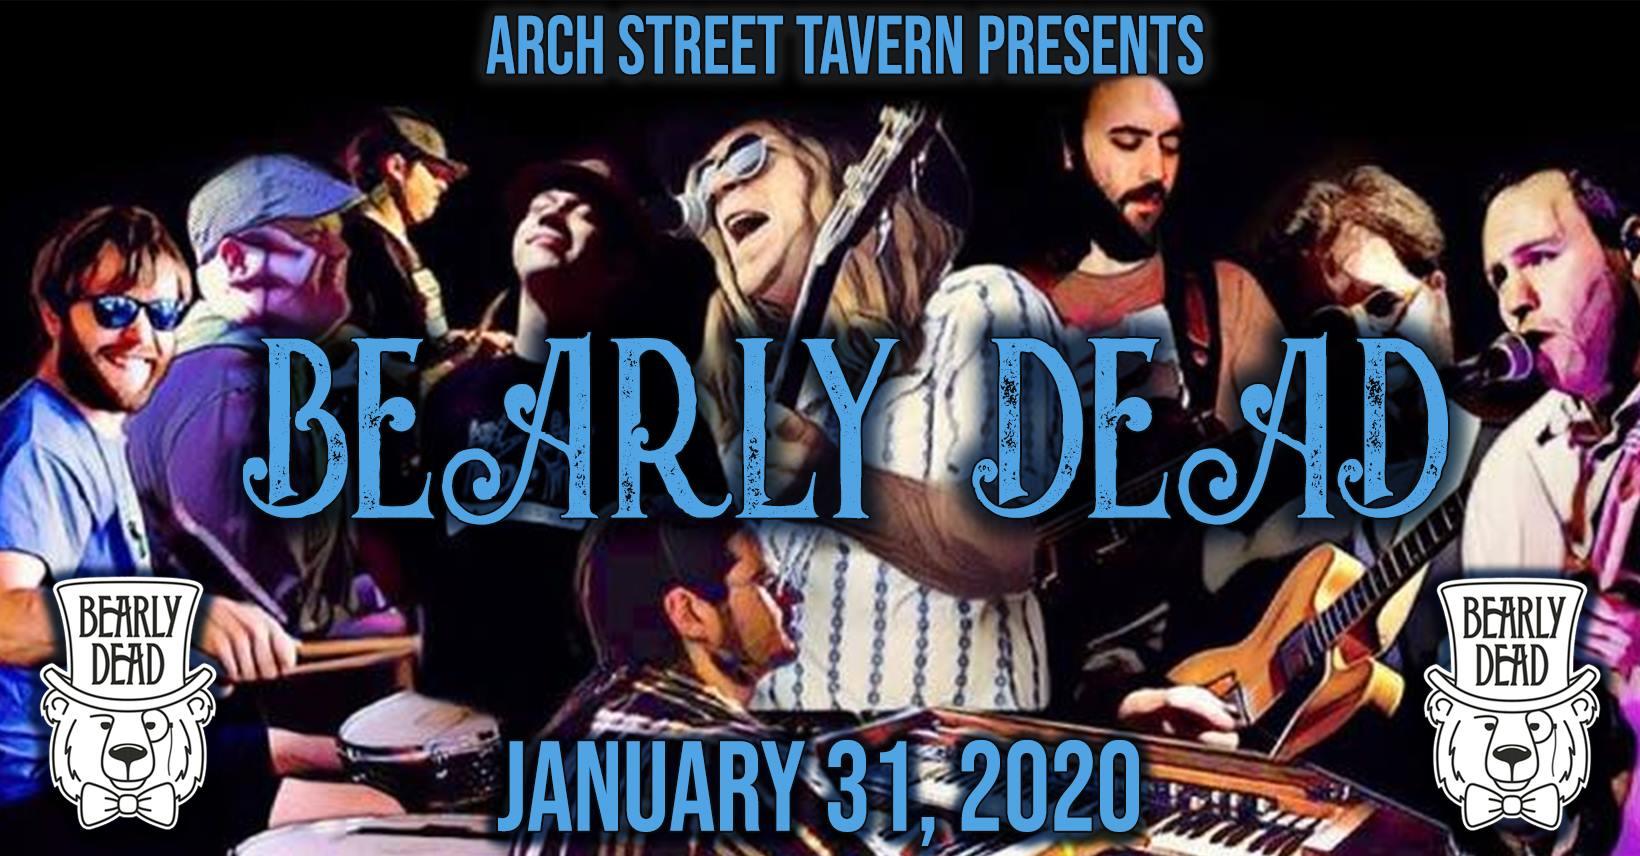 Bearly Dead at Arch Street Tavern